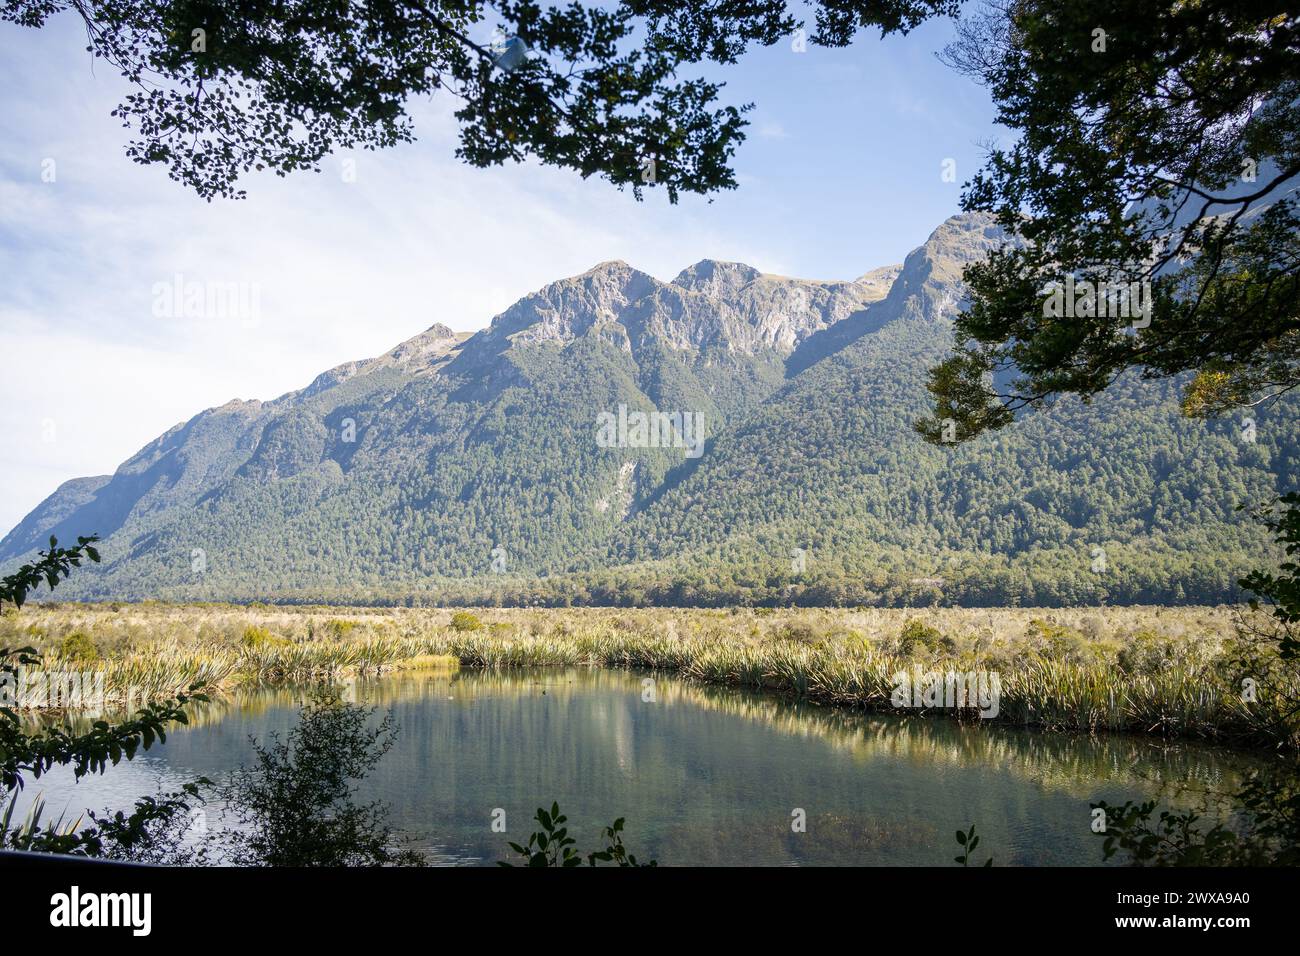 Mountain range with lake in foreground framed by tree branches, Fiordland, New Zealand. Stock Photo